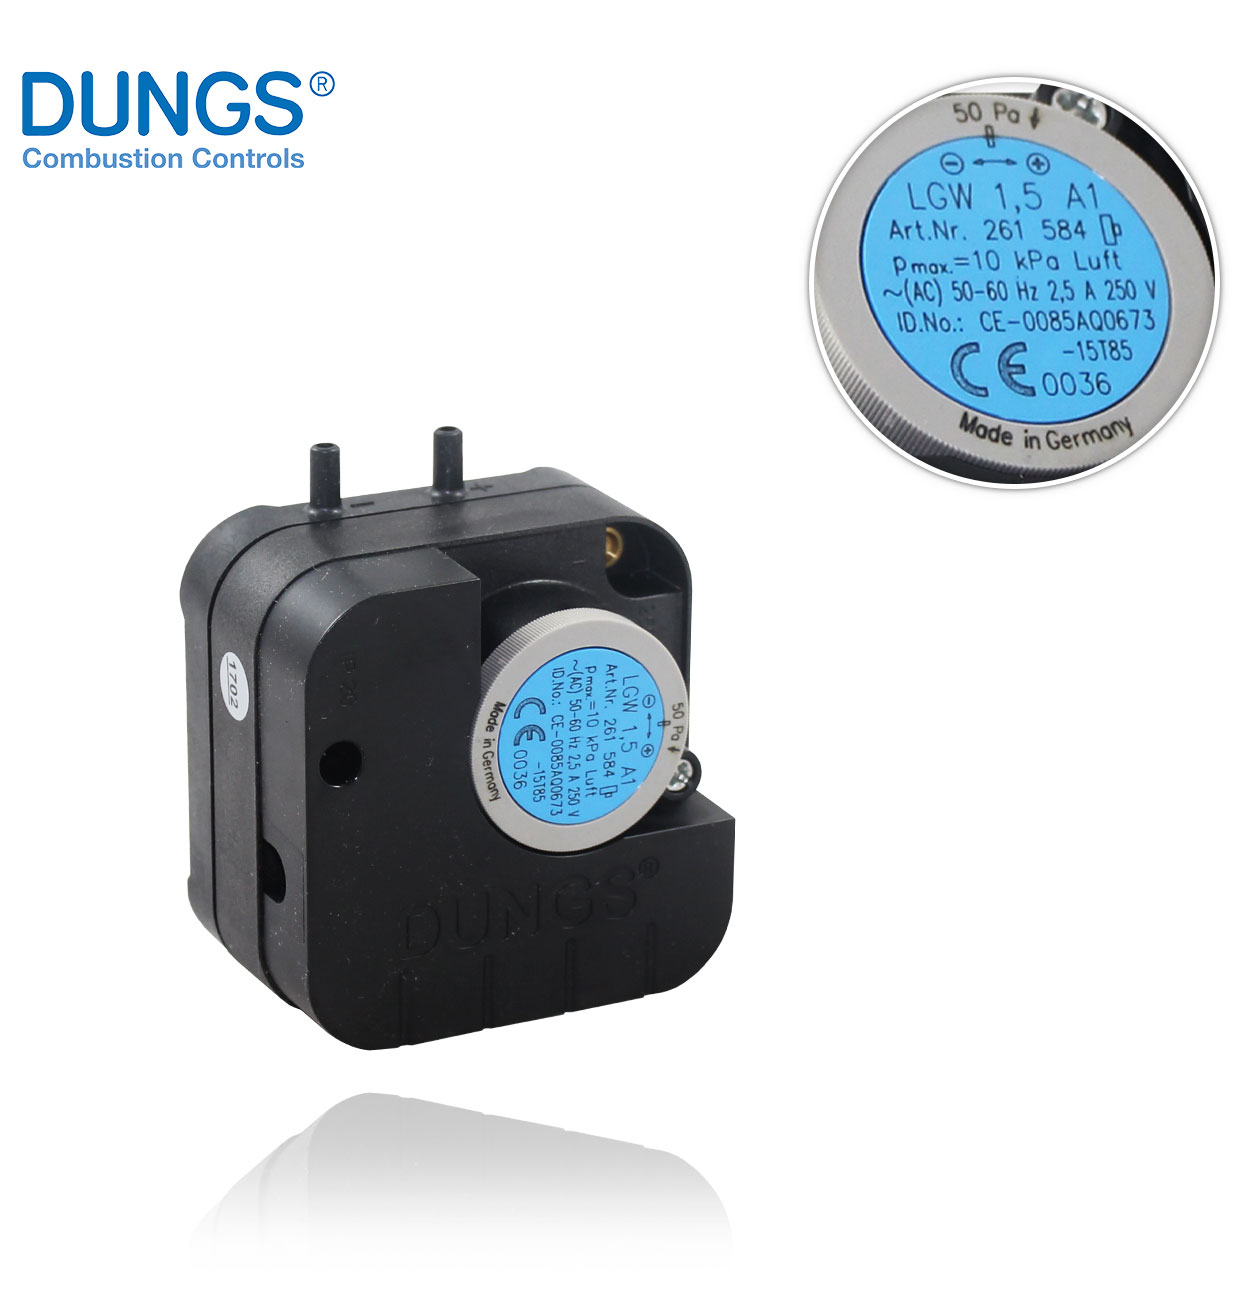 LGW 1.5 A1  50 fa se Ag g p± IP20 p1/p2 DUNGS PRESSURE SWITCH